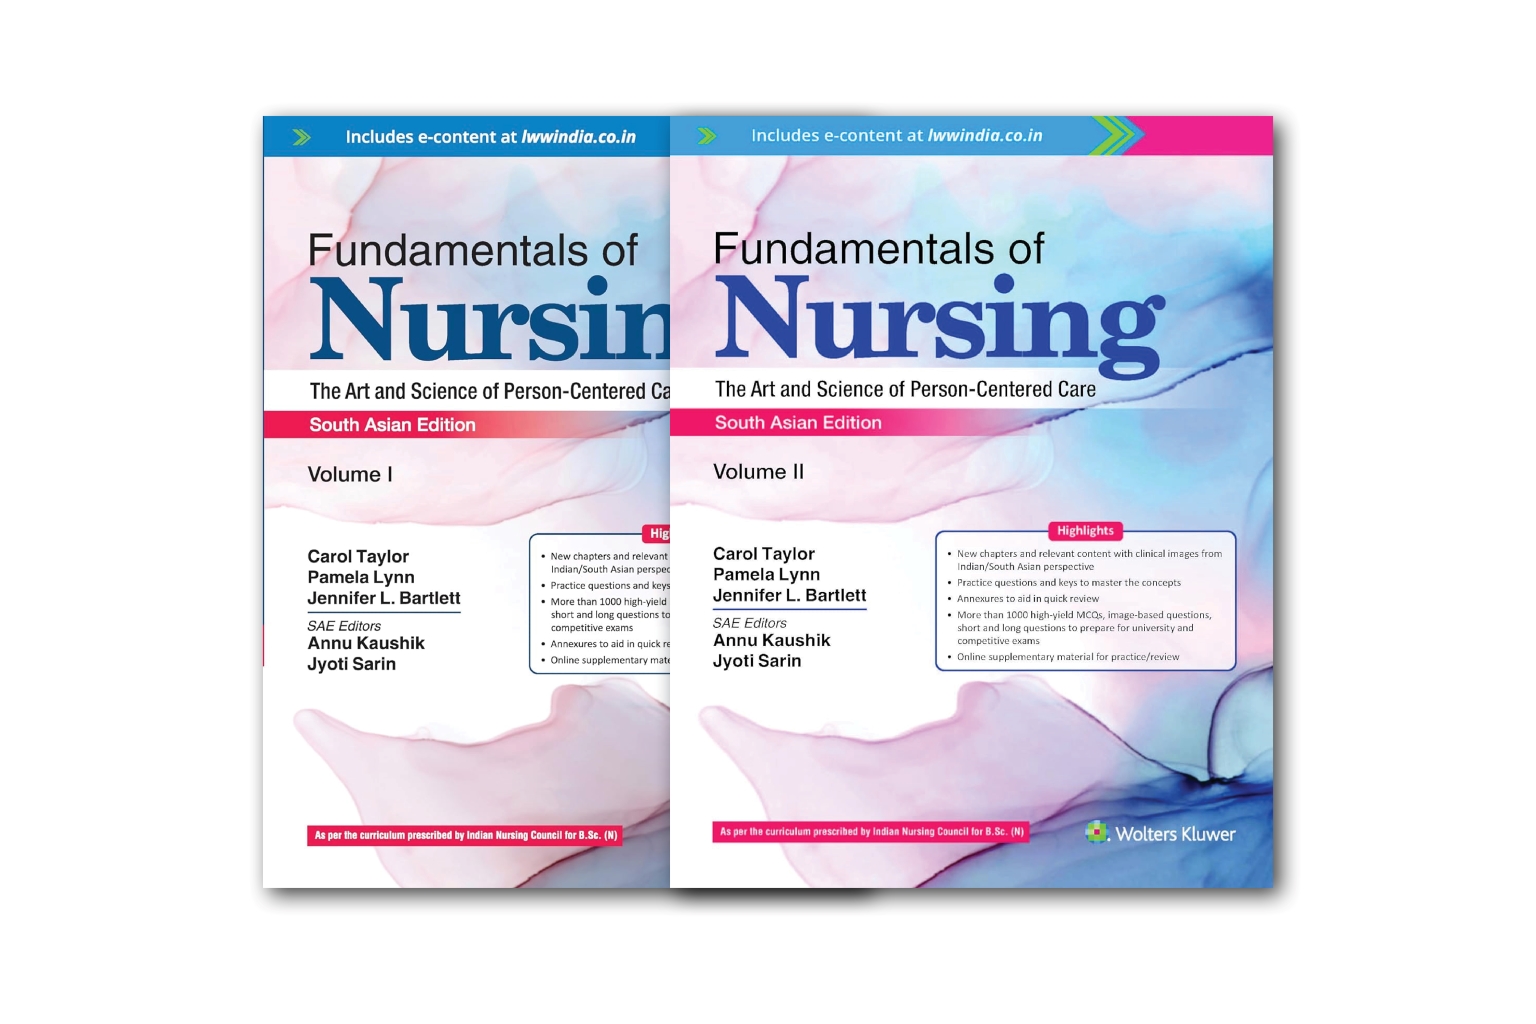 Fundamentals of Nursing South Asian Edition Volume I and II eContent cover.